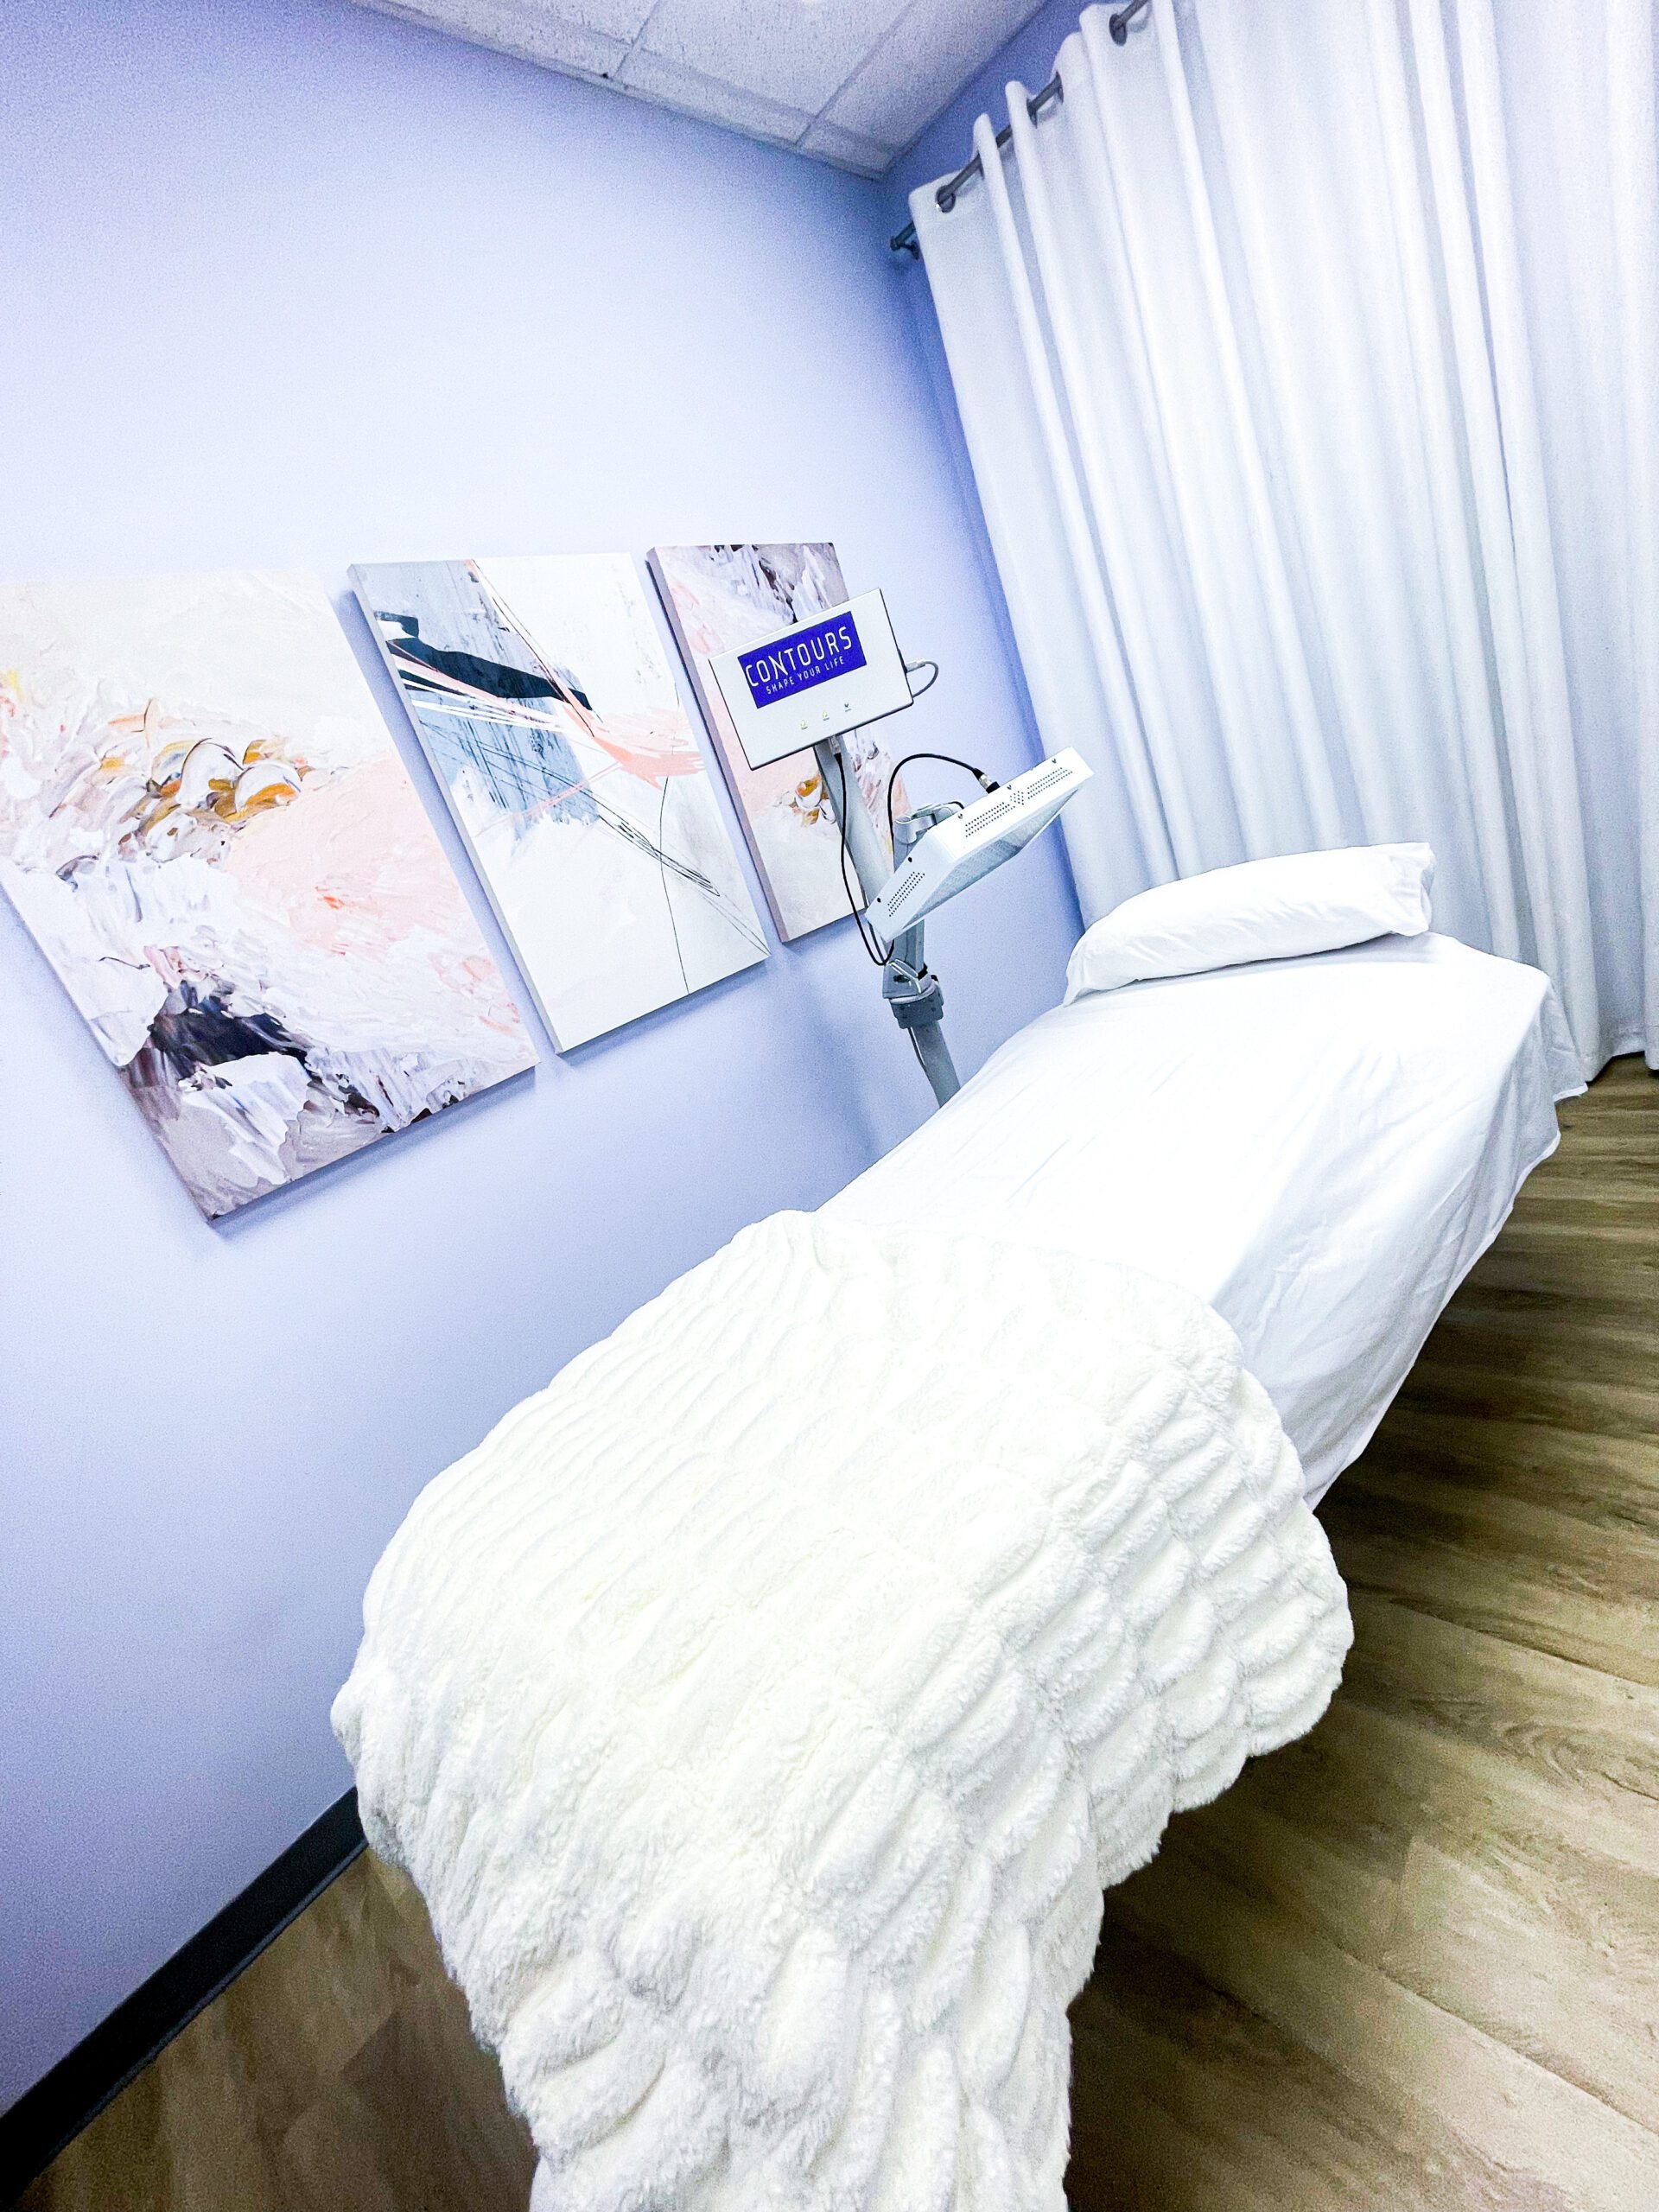 A patient room containing an examination table with all white linens and pillow and a red light therapy device.